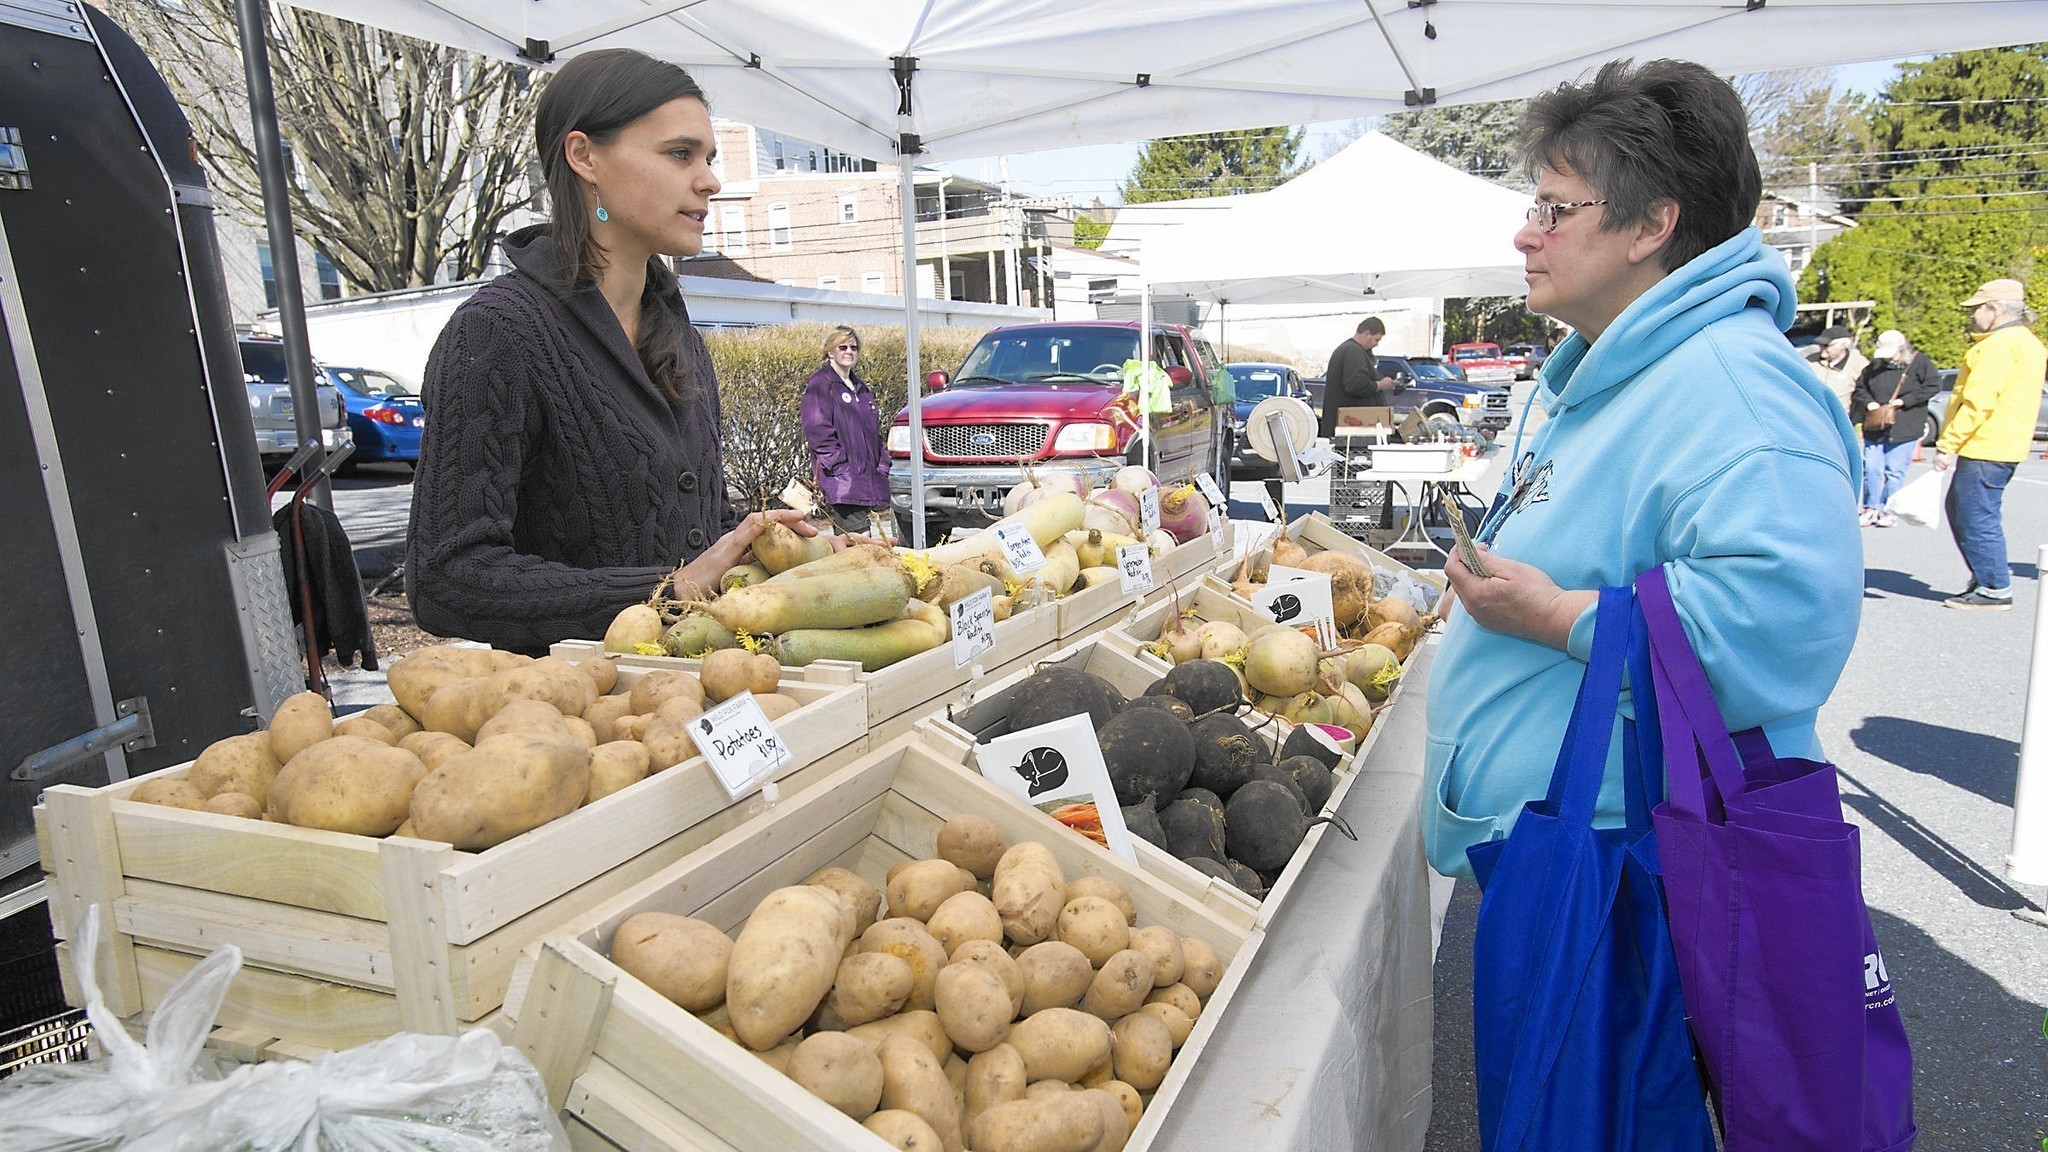 Friday night farmers market coming to downtown Allentown - The Morning Call2048 x 1152